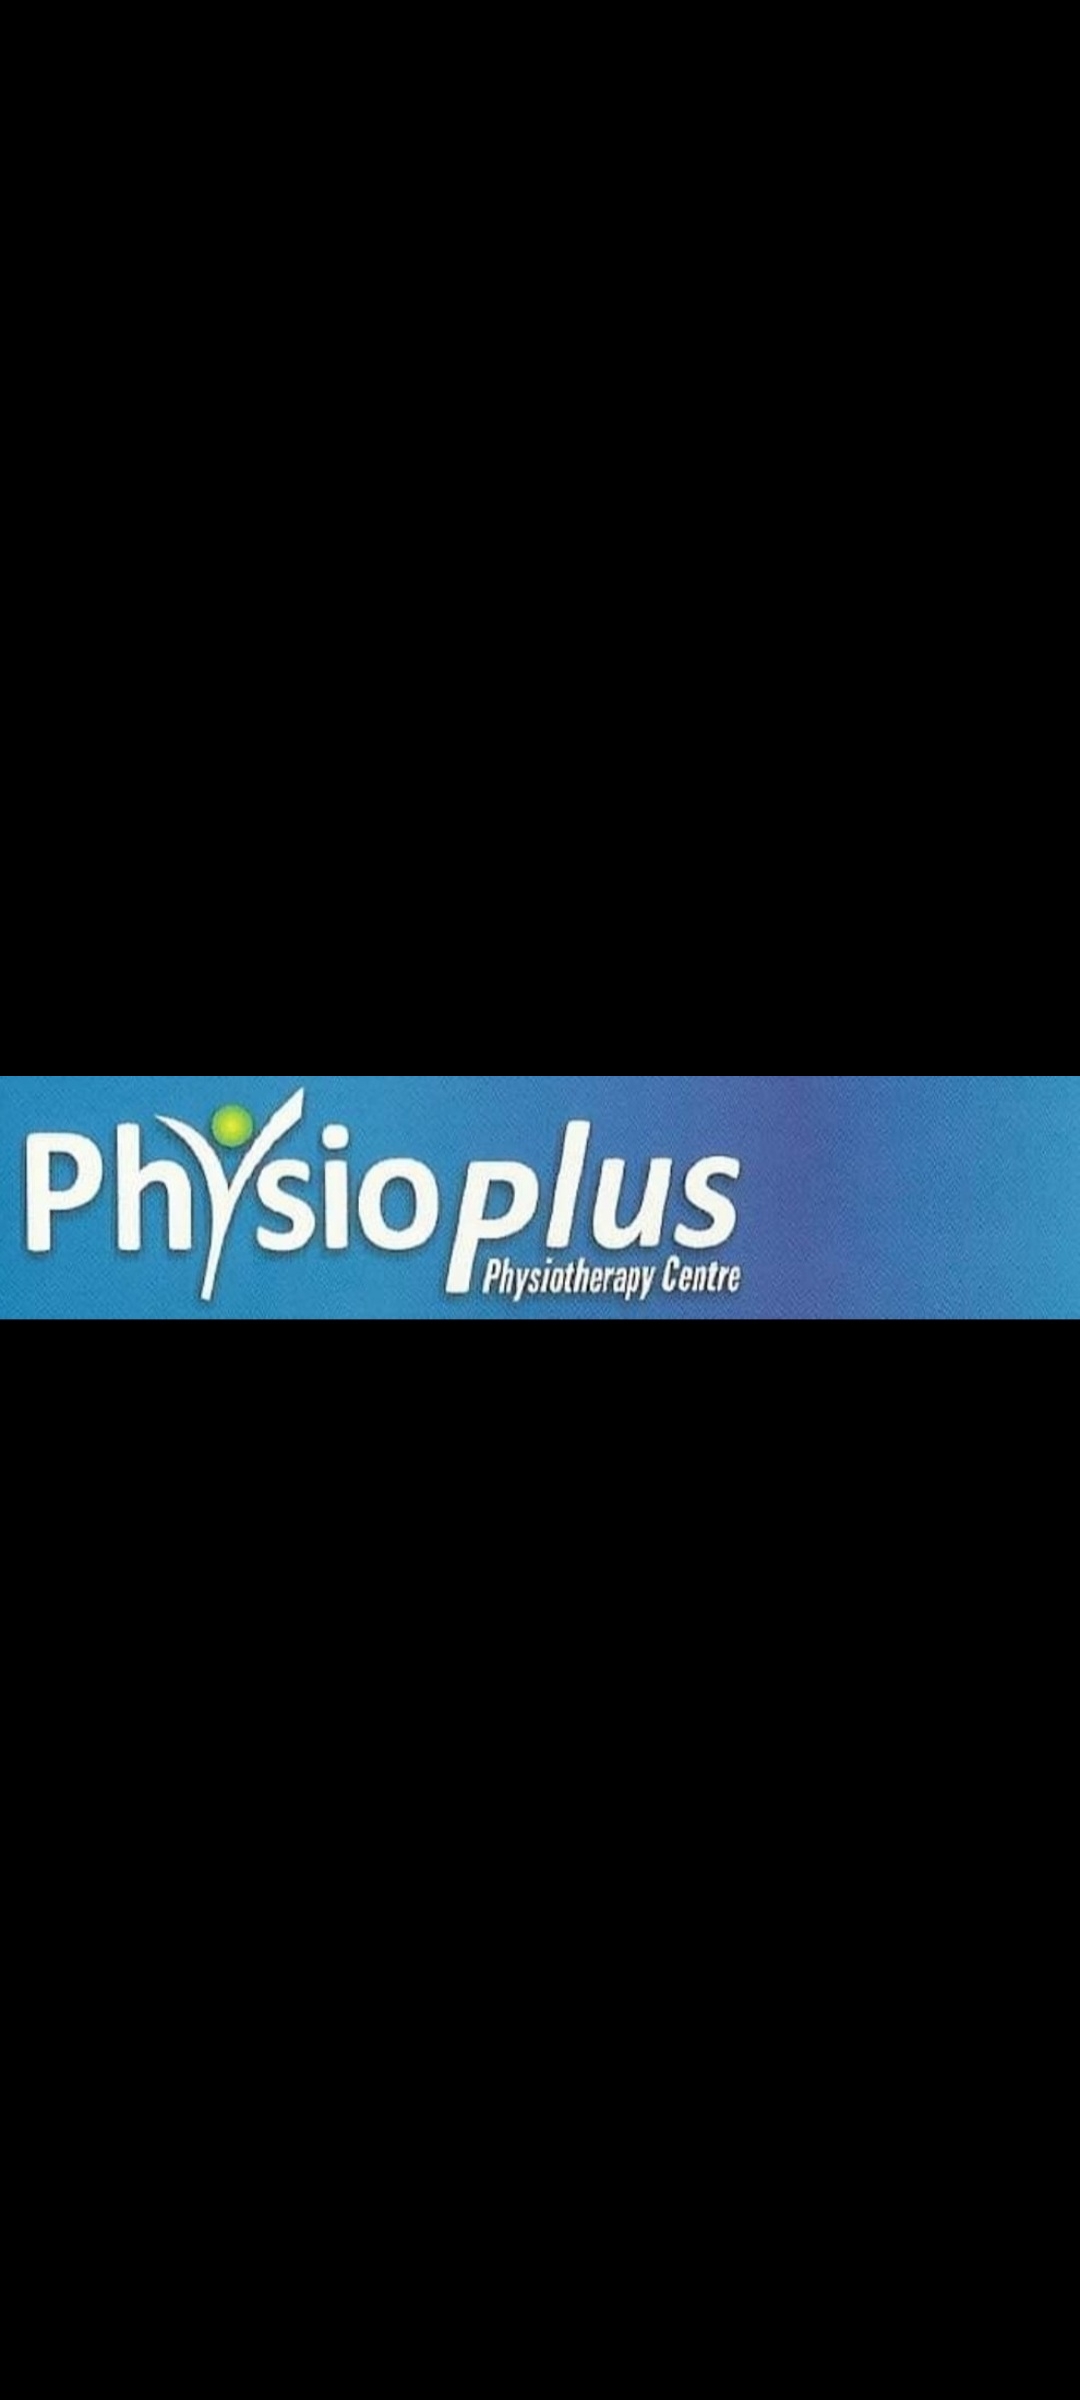 Physioplus Physiotherapy center